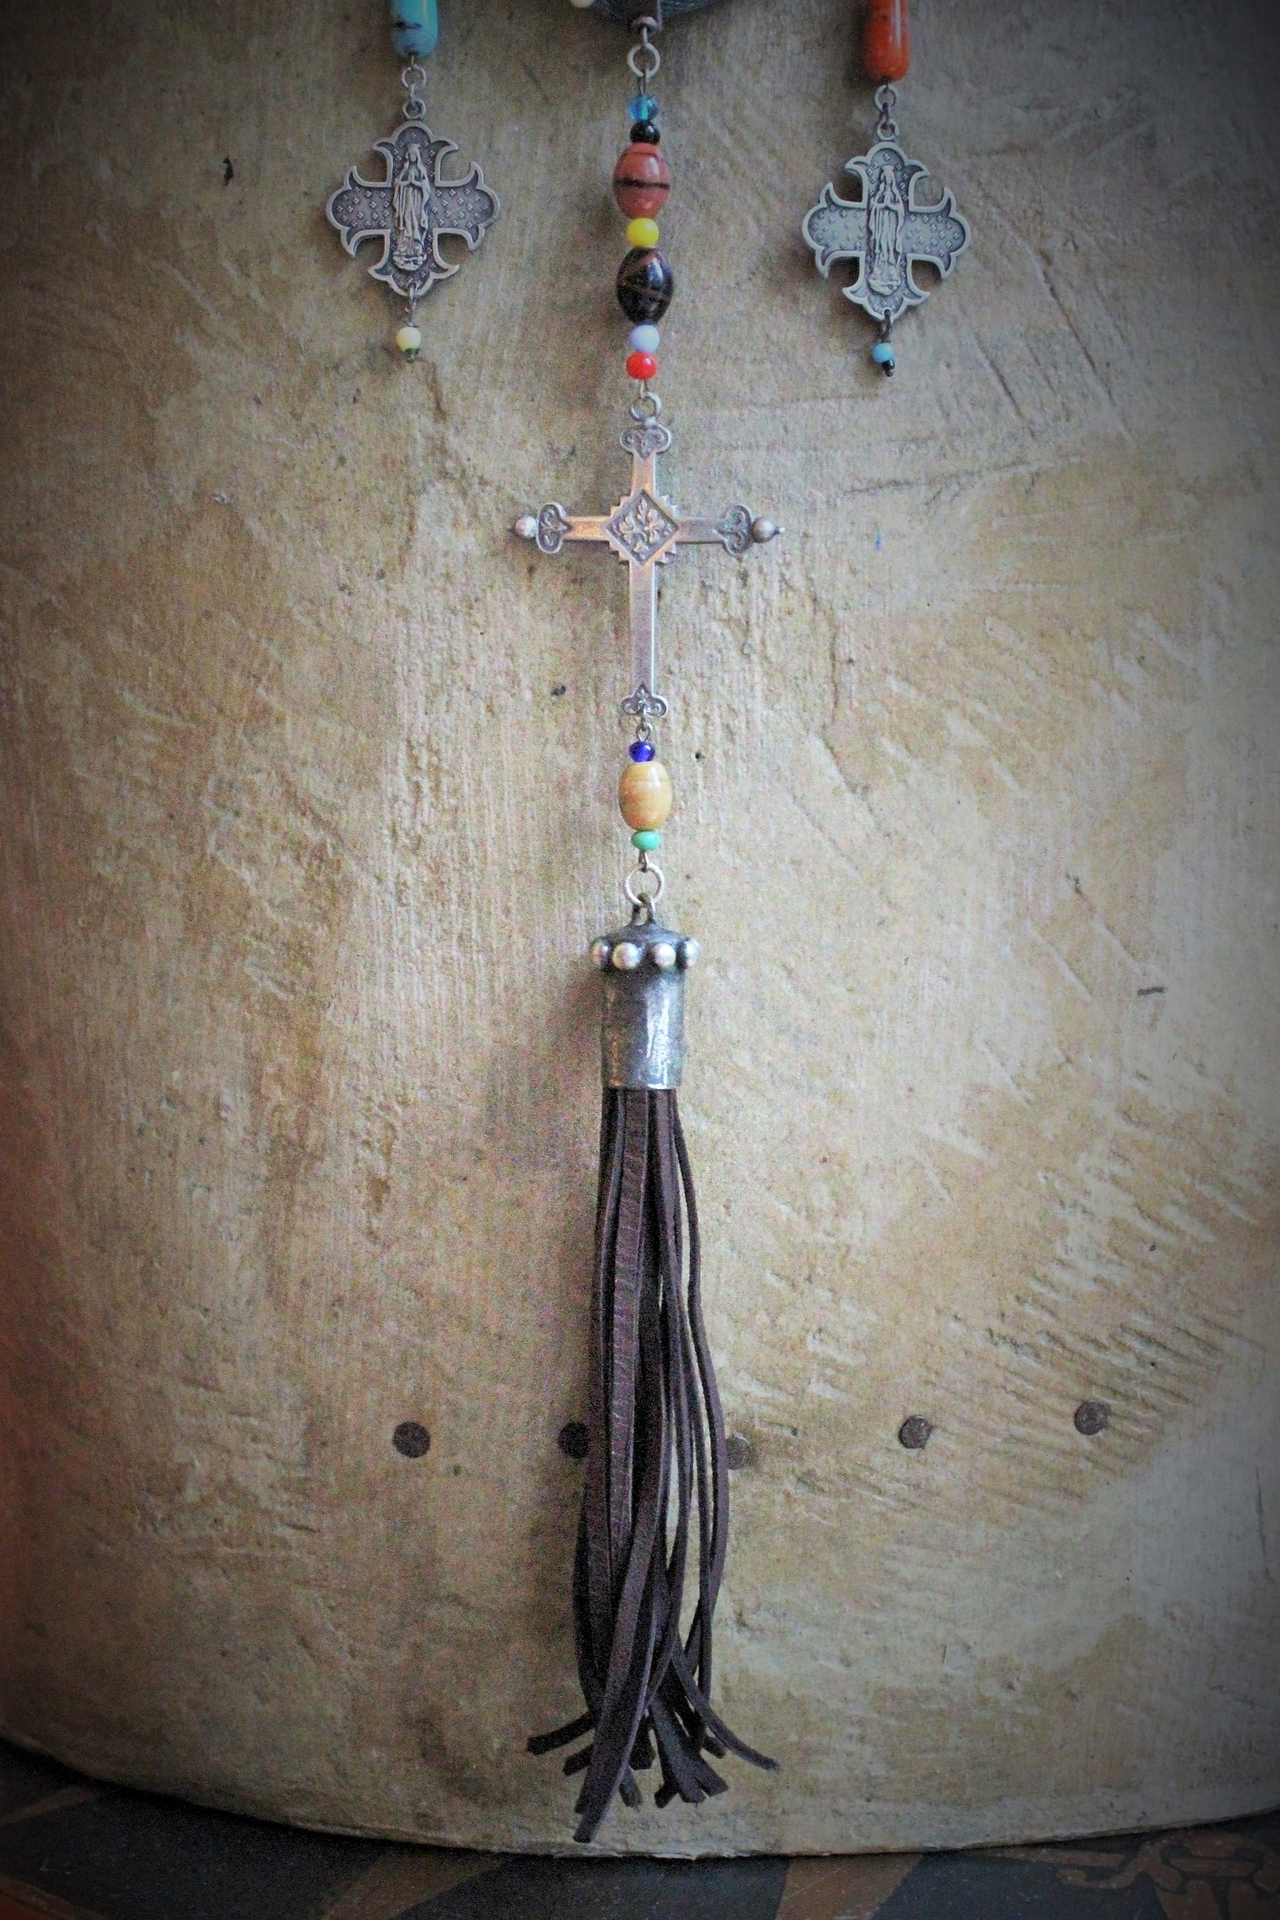 Hand Stitched Vintage Denim Necklace w/French Marian 4 Way Crosses, Antique Mardi Gras Beads, Artisan Leather Tassel, Sterling Clasp